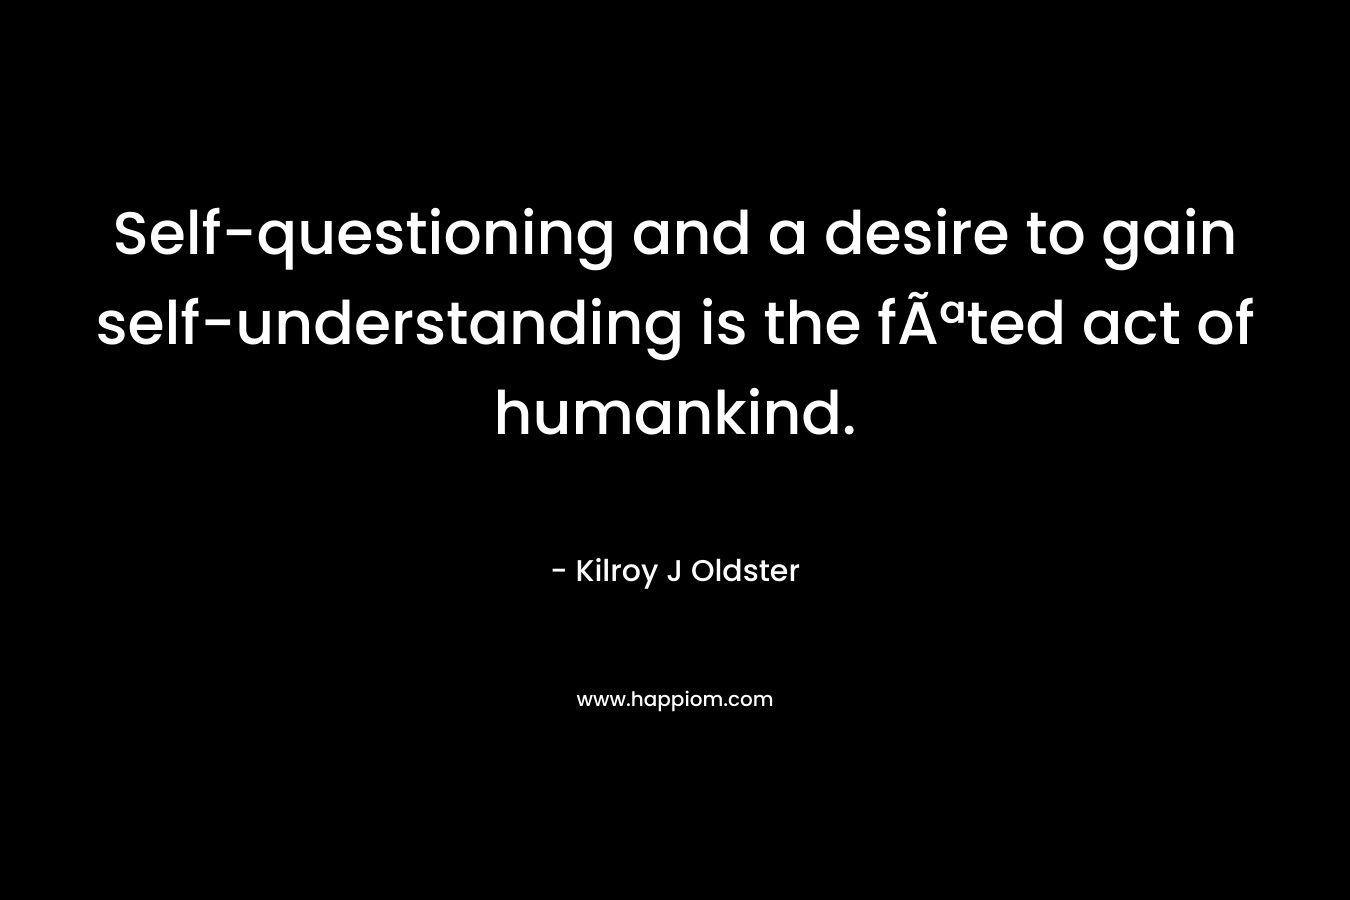 Self-questioning and a desire to gain self-understanding is the fÃªted act of humankind. – Kilroy J Oldster